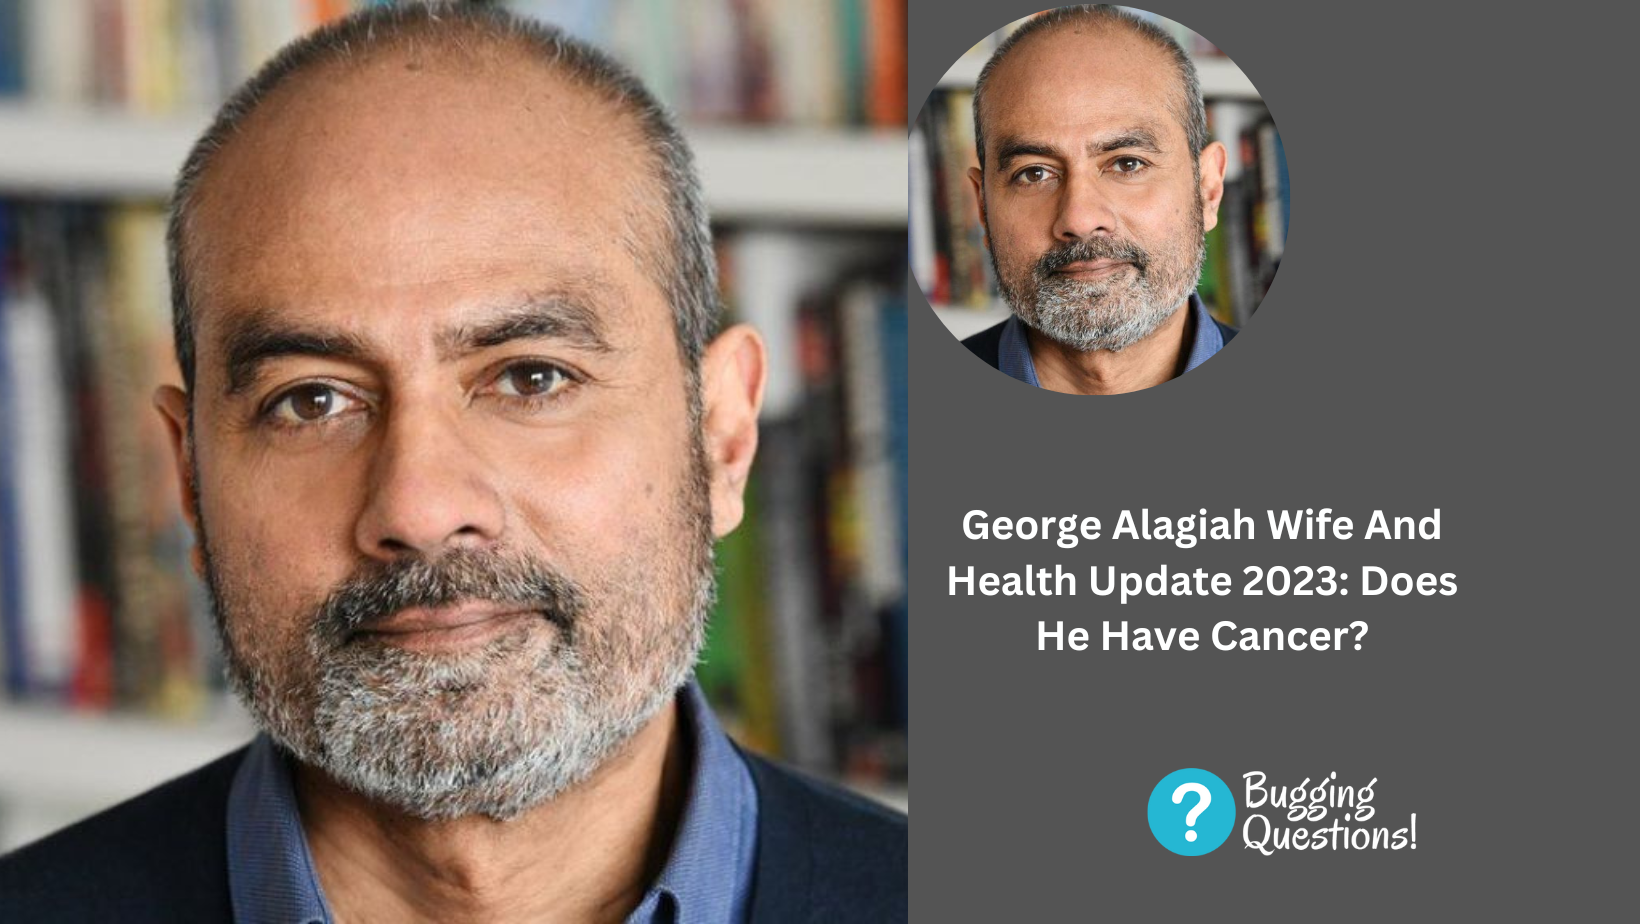 George Alagiah Wife And Health Update 2023: Does He Have Cancer?